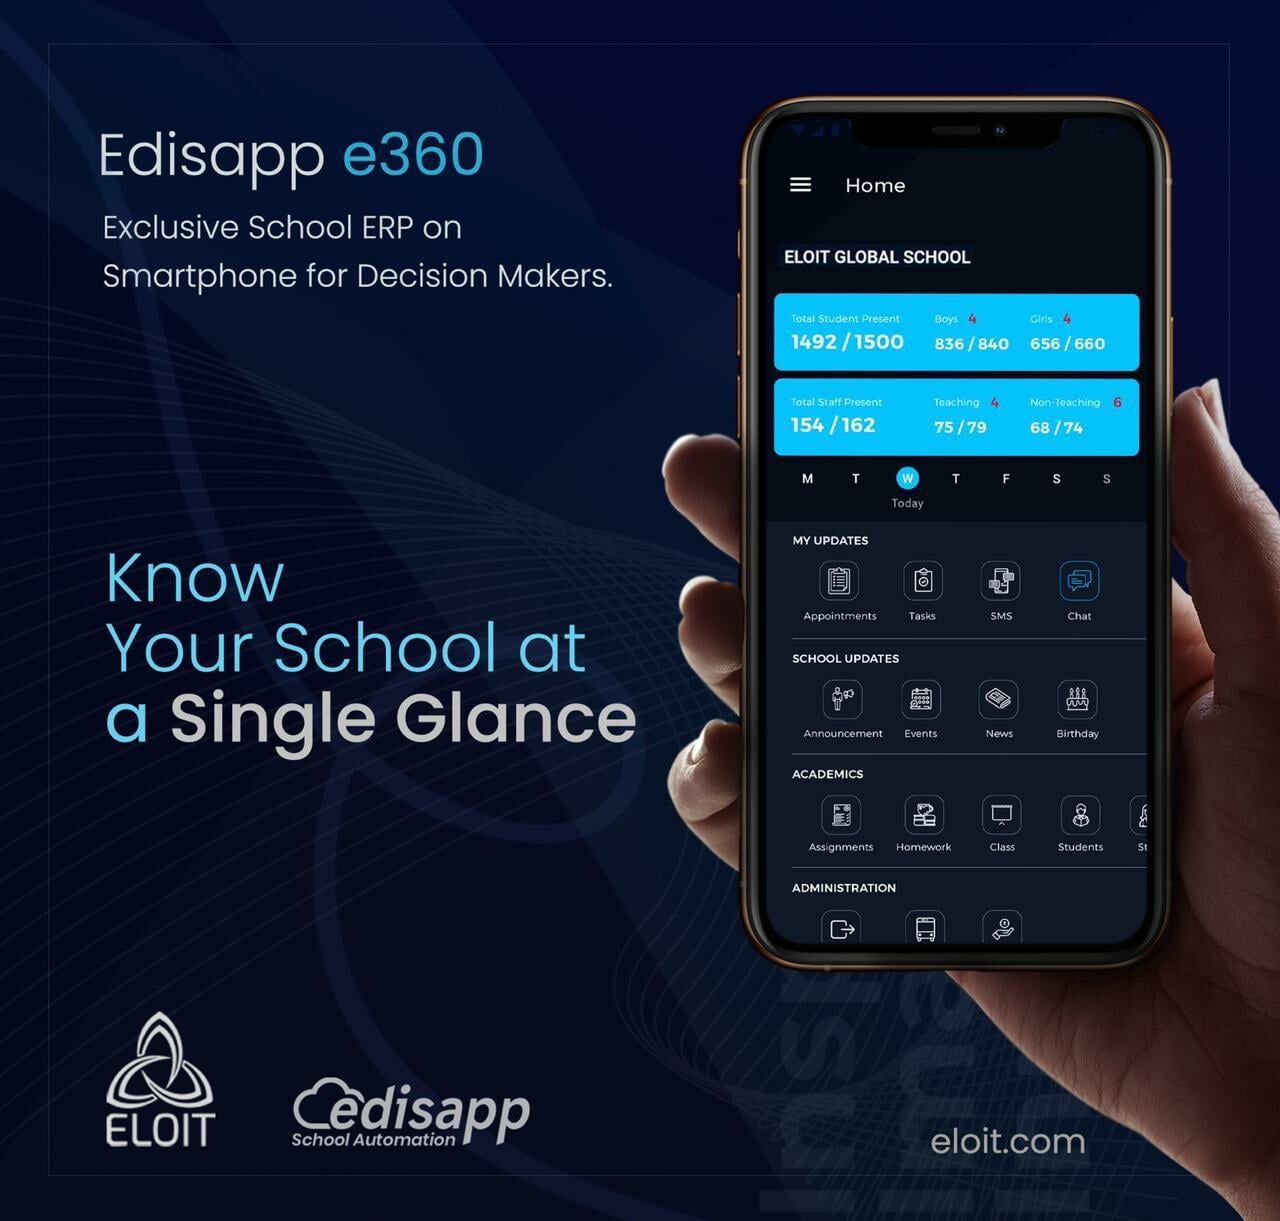 View complete information of a student on your phone, quickly with Edisapp e360